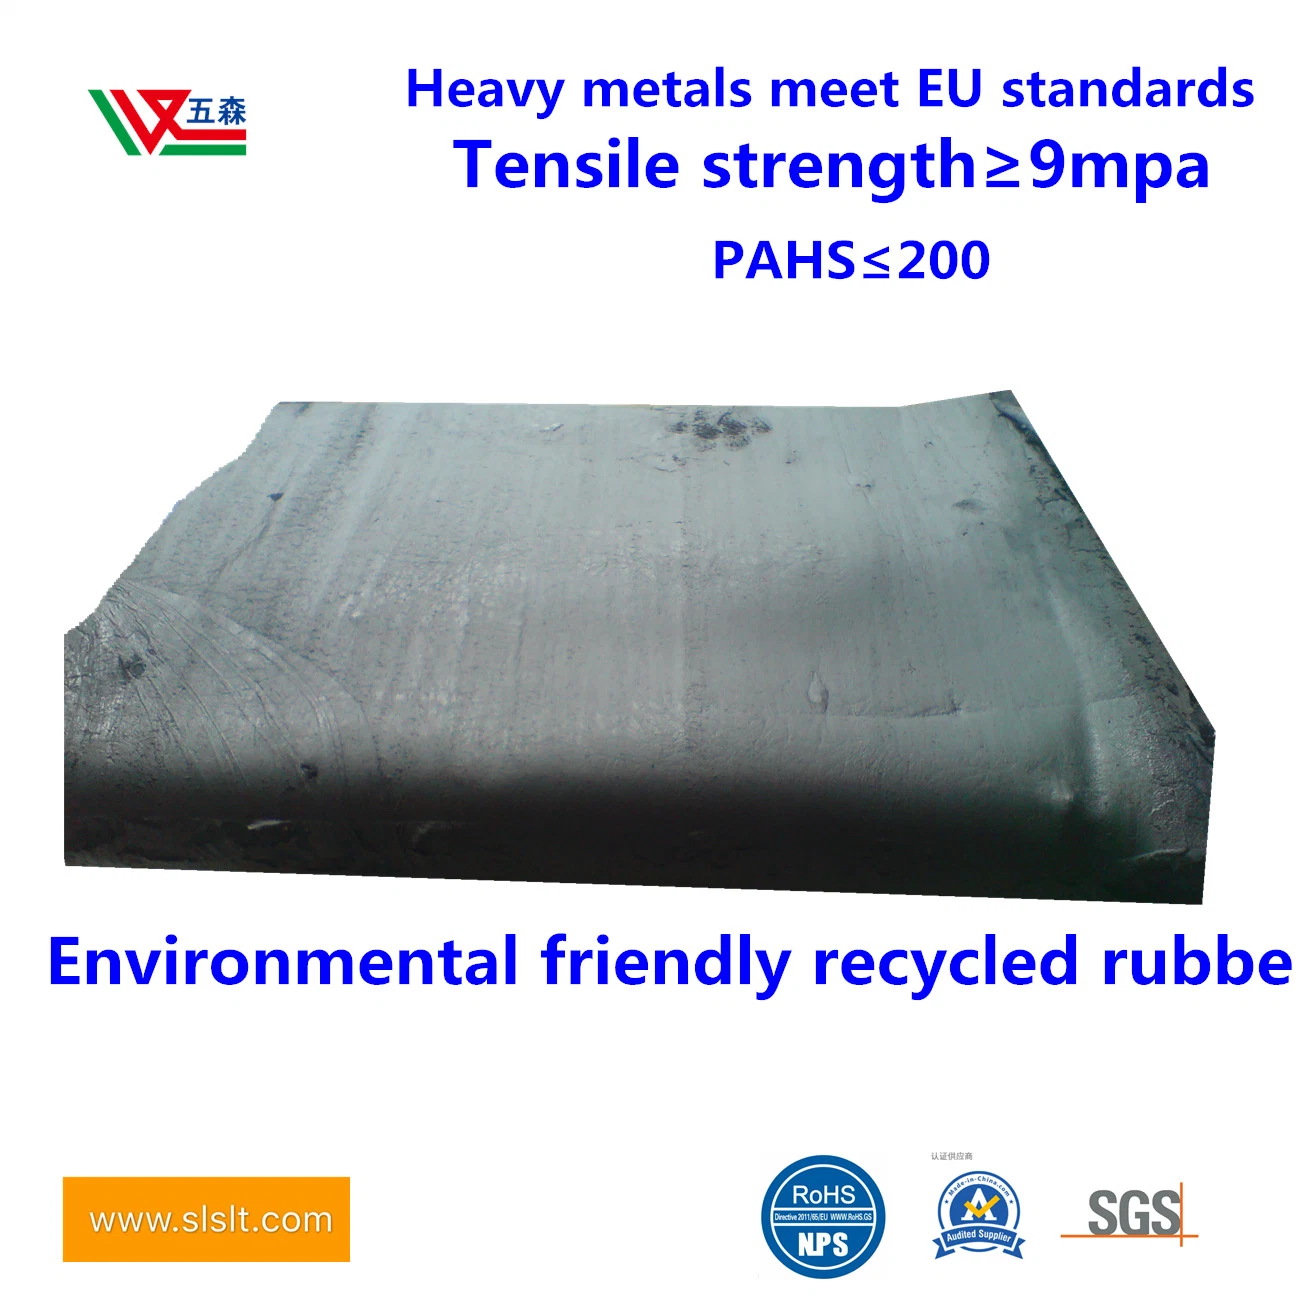 Environmental Friendly, Tasteless and Recycled Tire Rubber Tensile Strength 11MPa